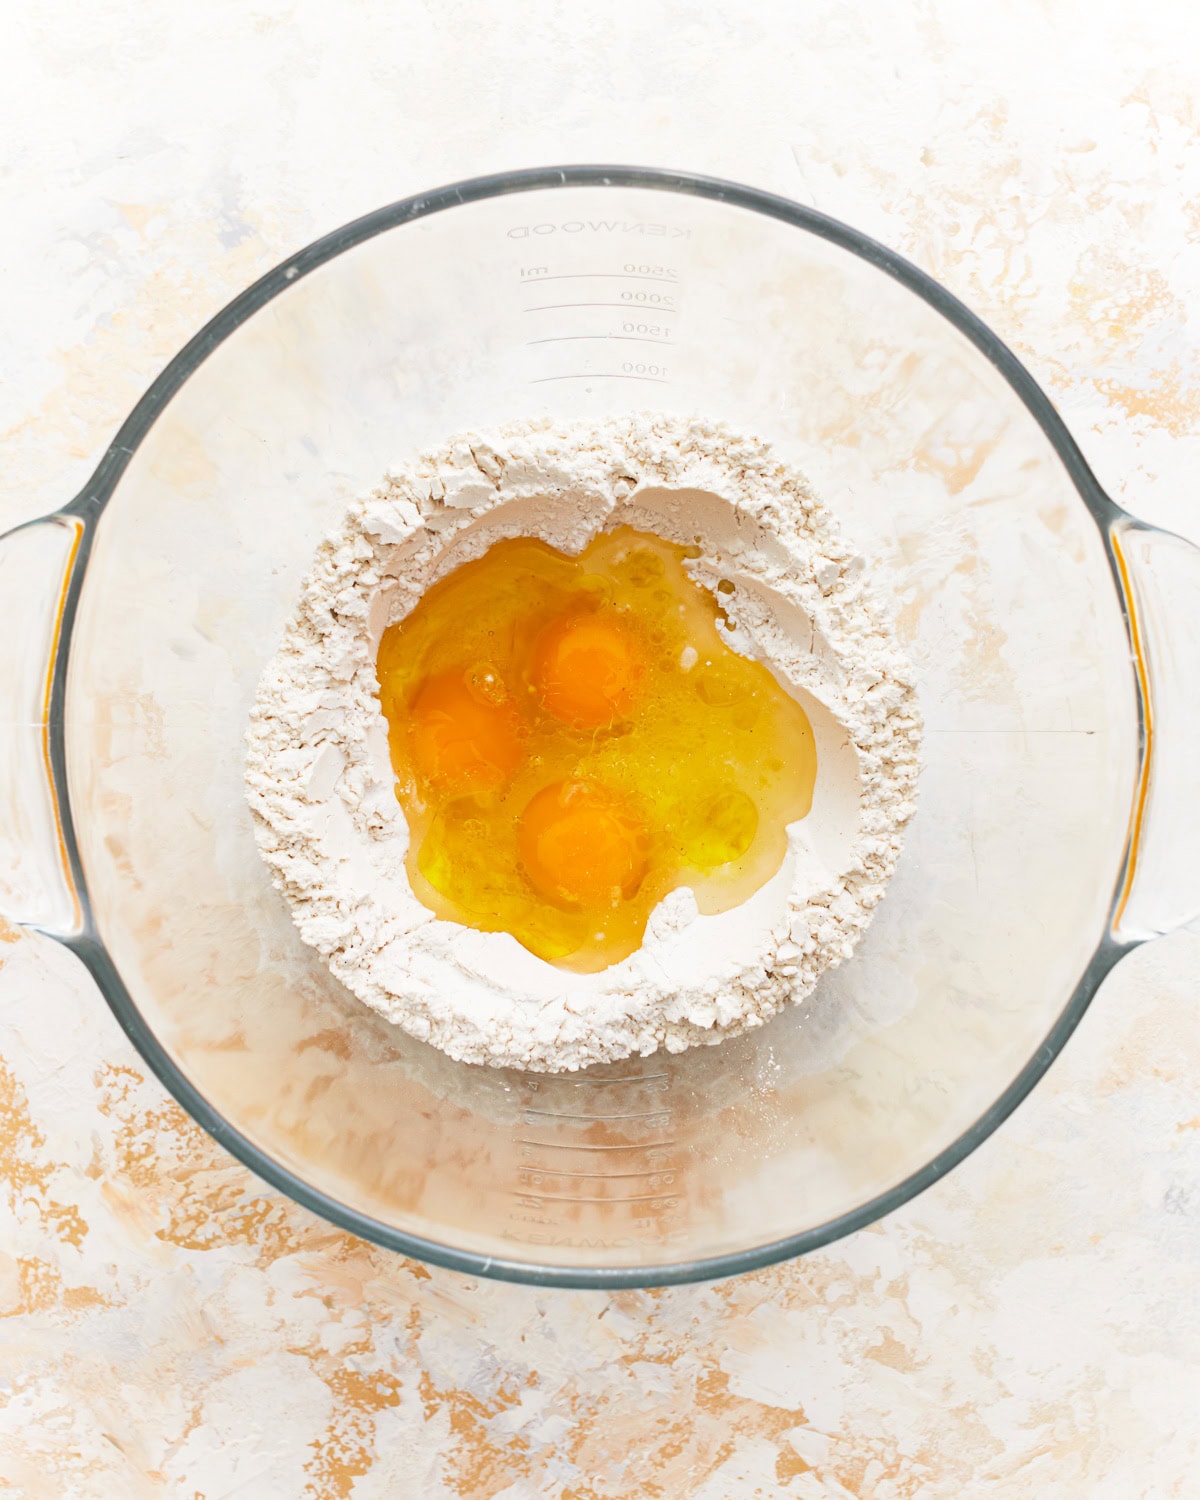 eggs in the center of a flour well in a glass bowl.